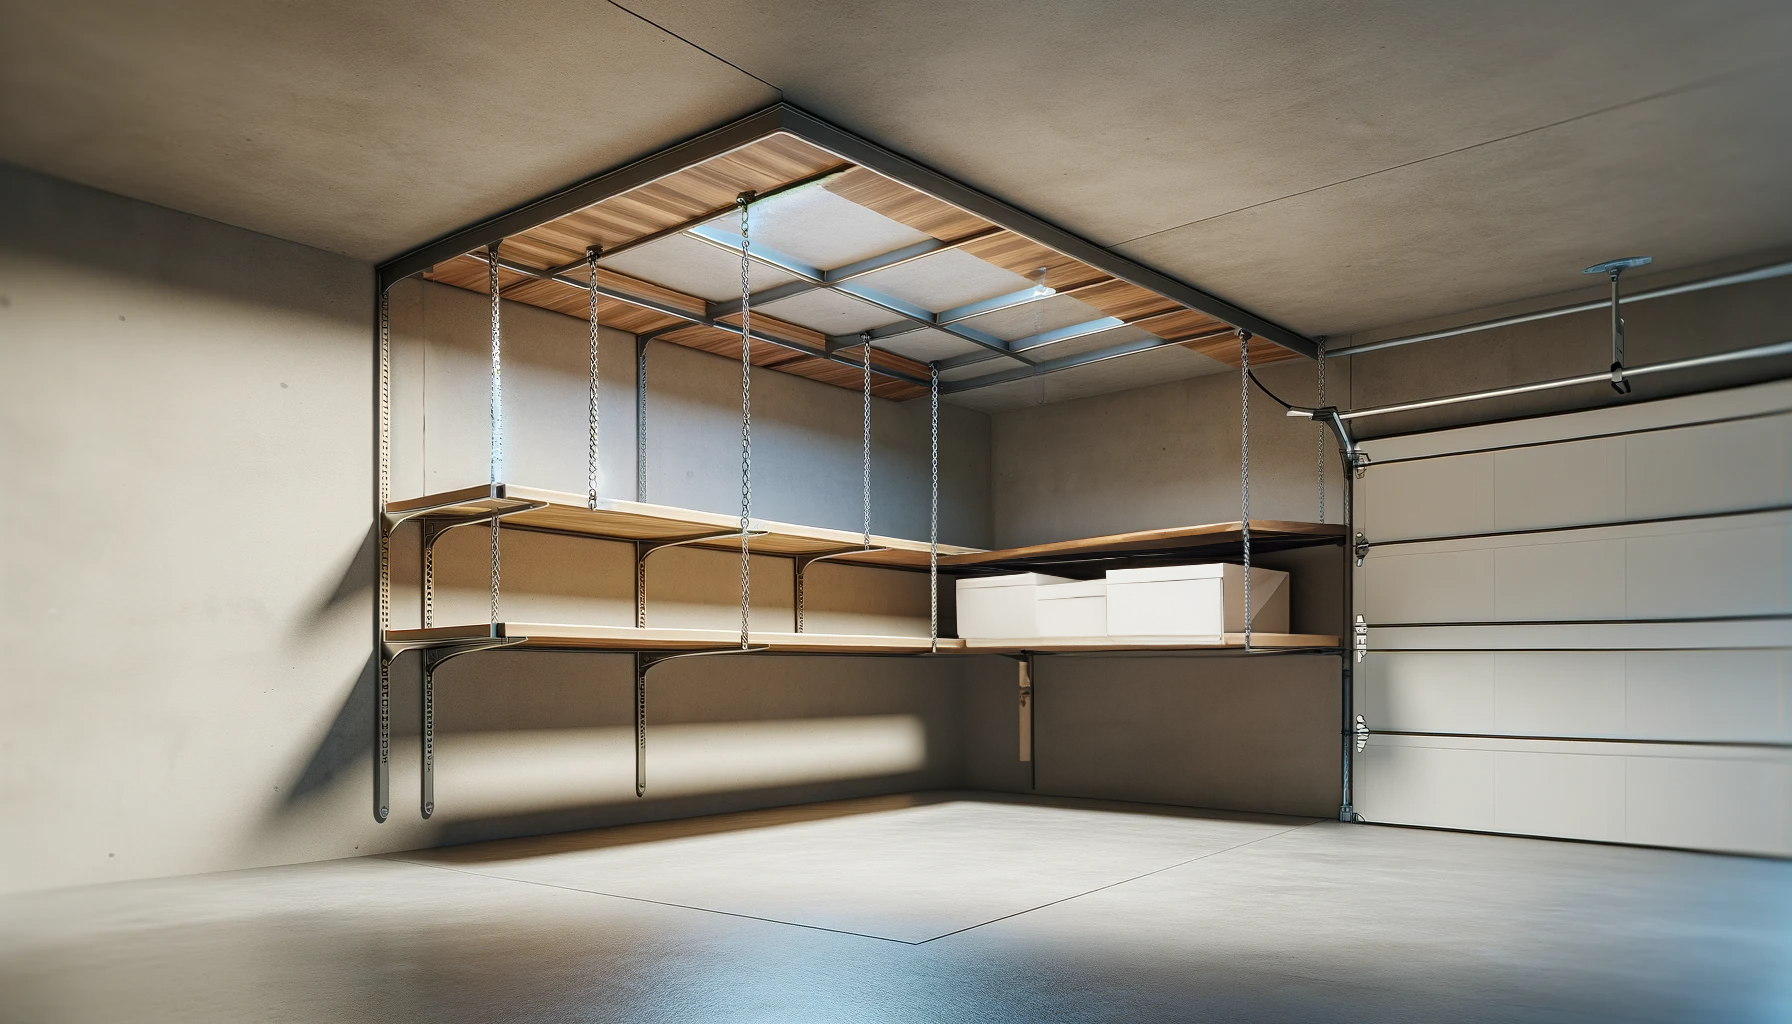 Garage Storage: How to Maximize Your Space to The Fullest